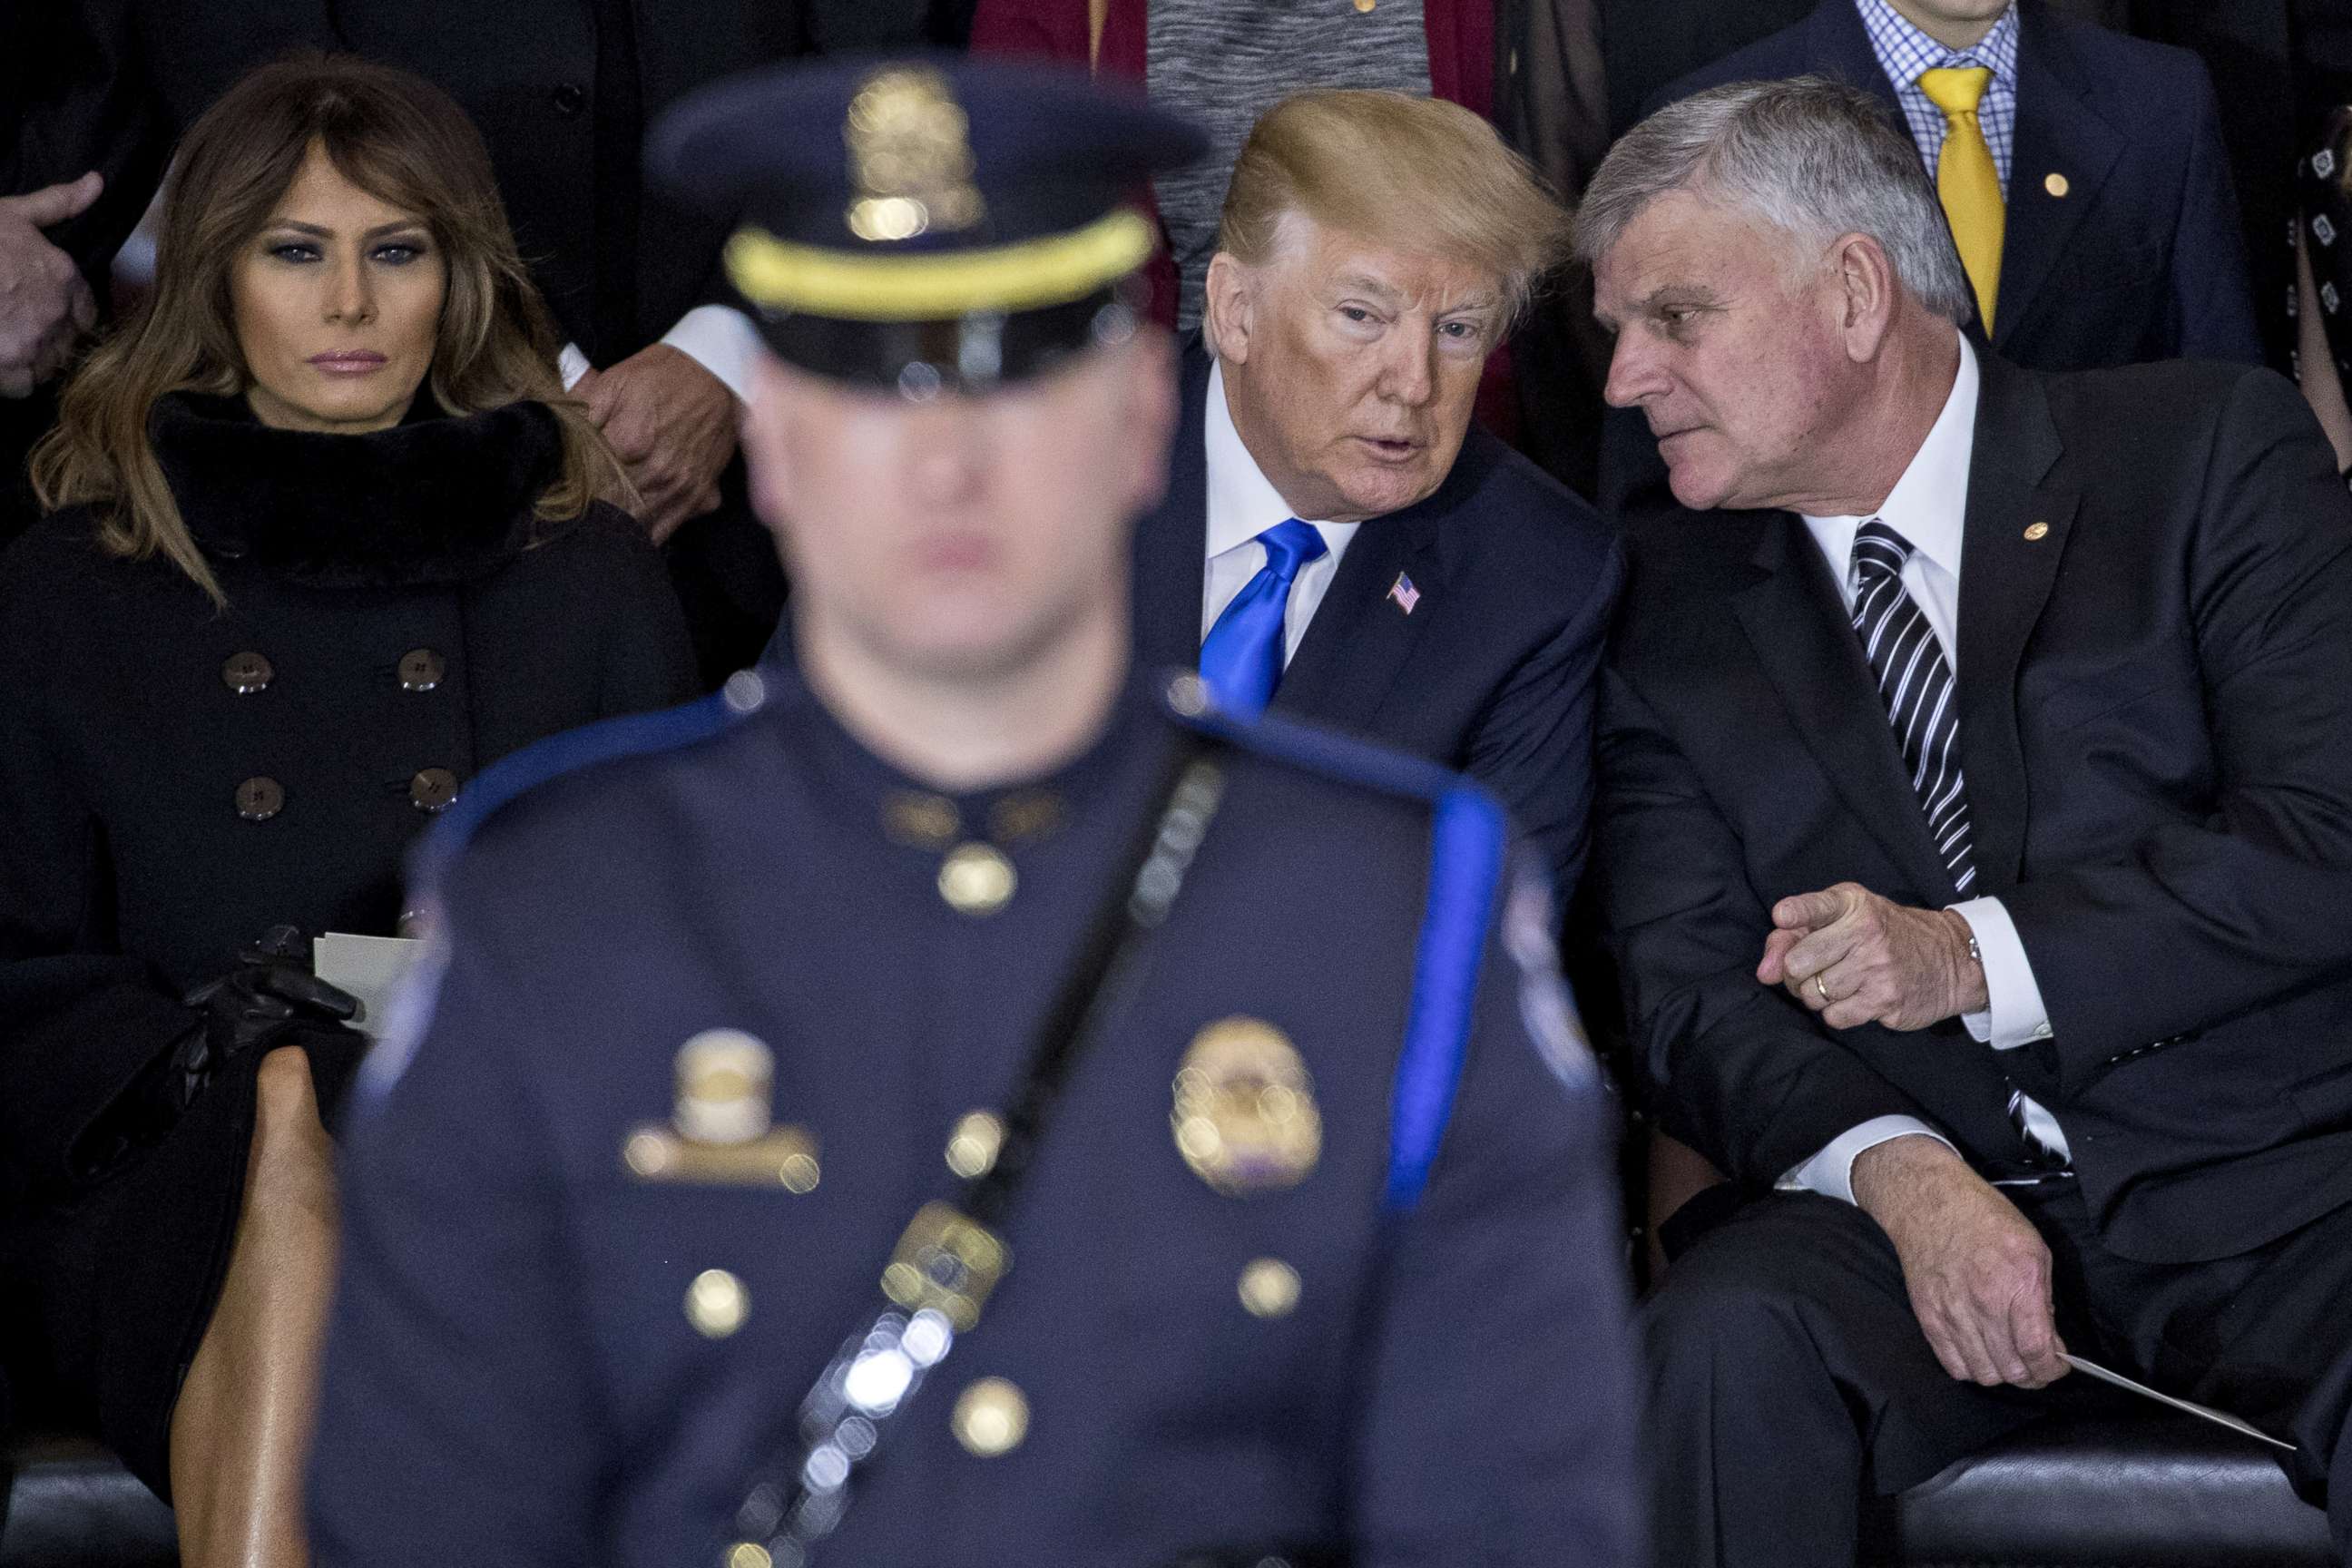 PHOTO: President Donald Trump talks to Franklin Graham, son of the late Reverend Billy Graham, during a service in Washington, D.C., Feb. 28, 2018.